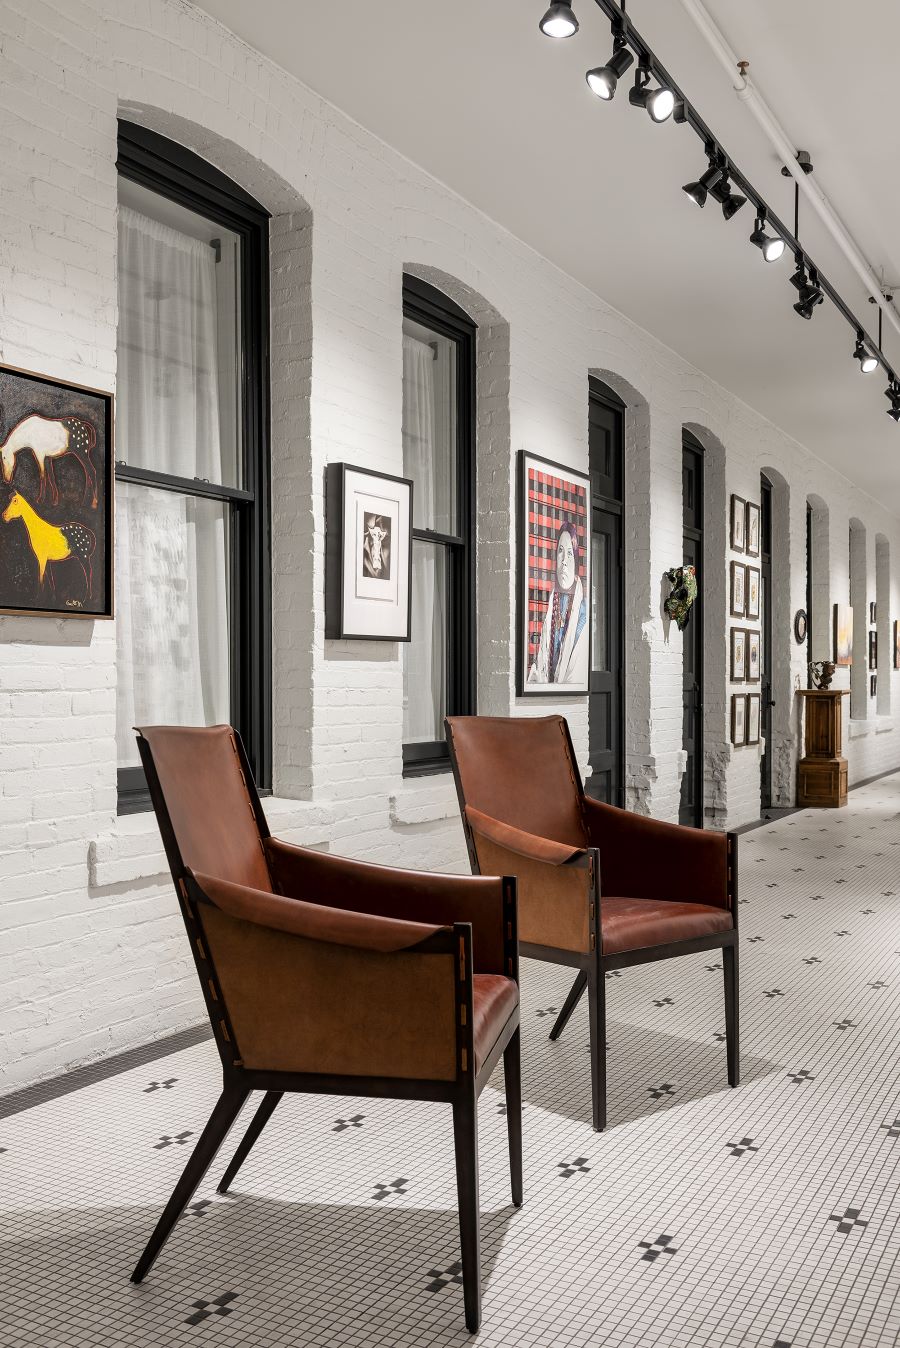 Shown here in Kibler & Kirch’s Stapleton Gallery, where Young curates work from talented Montana artists, the Gunnison Chair combines variegated natural leather with contemporary lines.